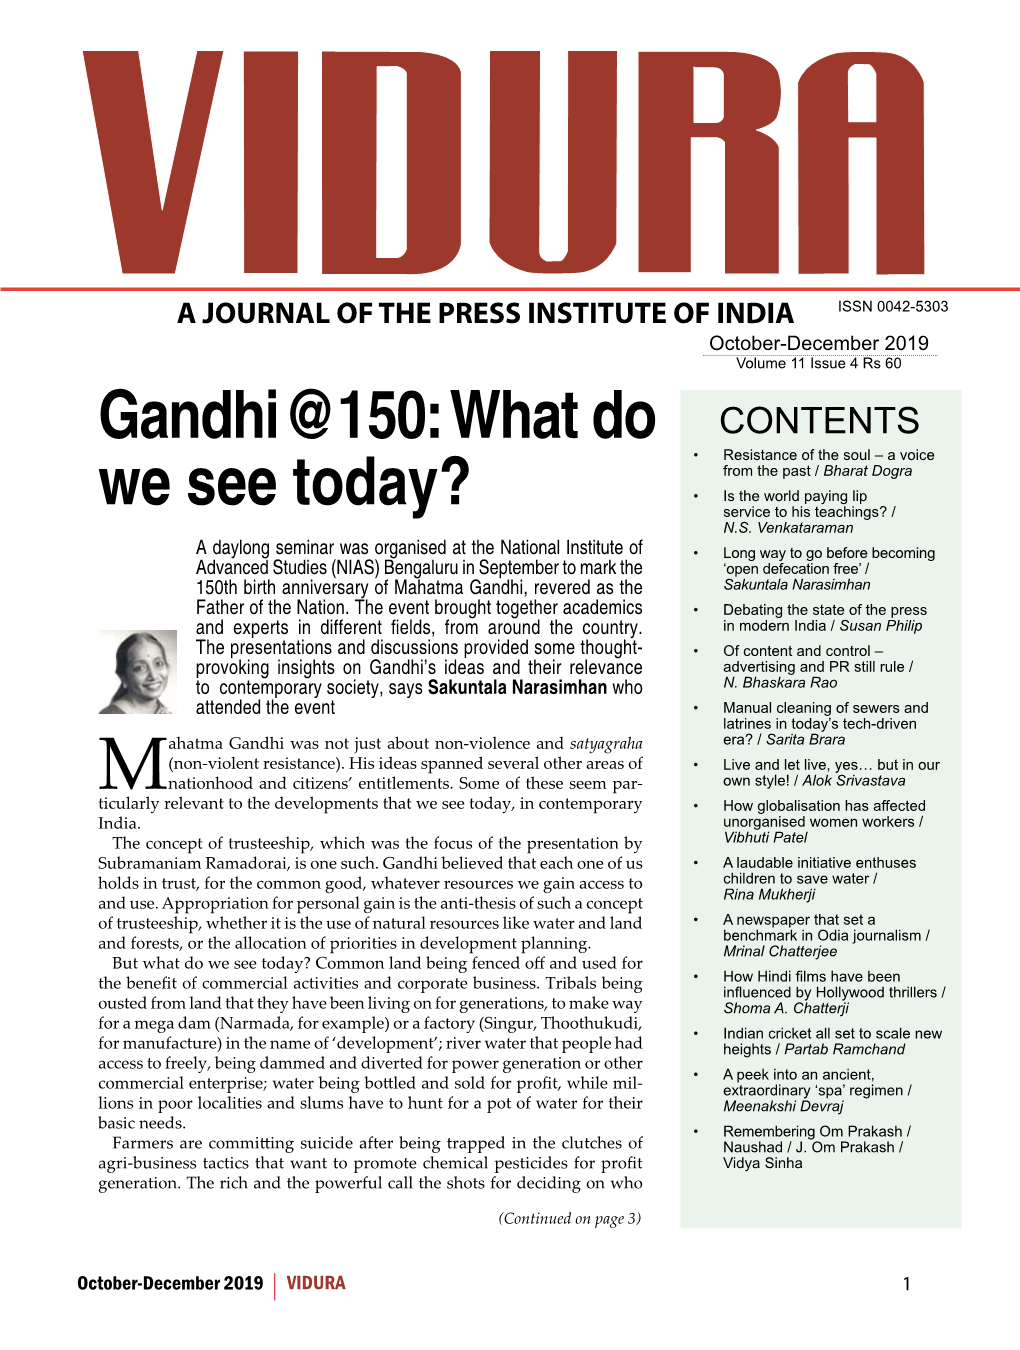 Gandhi @150: What Do CONTENTS • Resistance of the Soul – a Voice from the Past / Bharat Dogra • Is the World Paying Lip We See Today? Service to His Teachings? / N.S